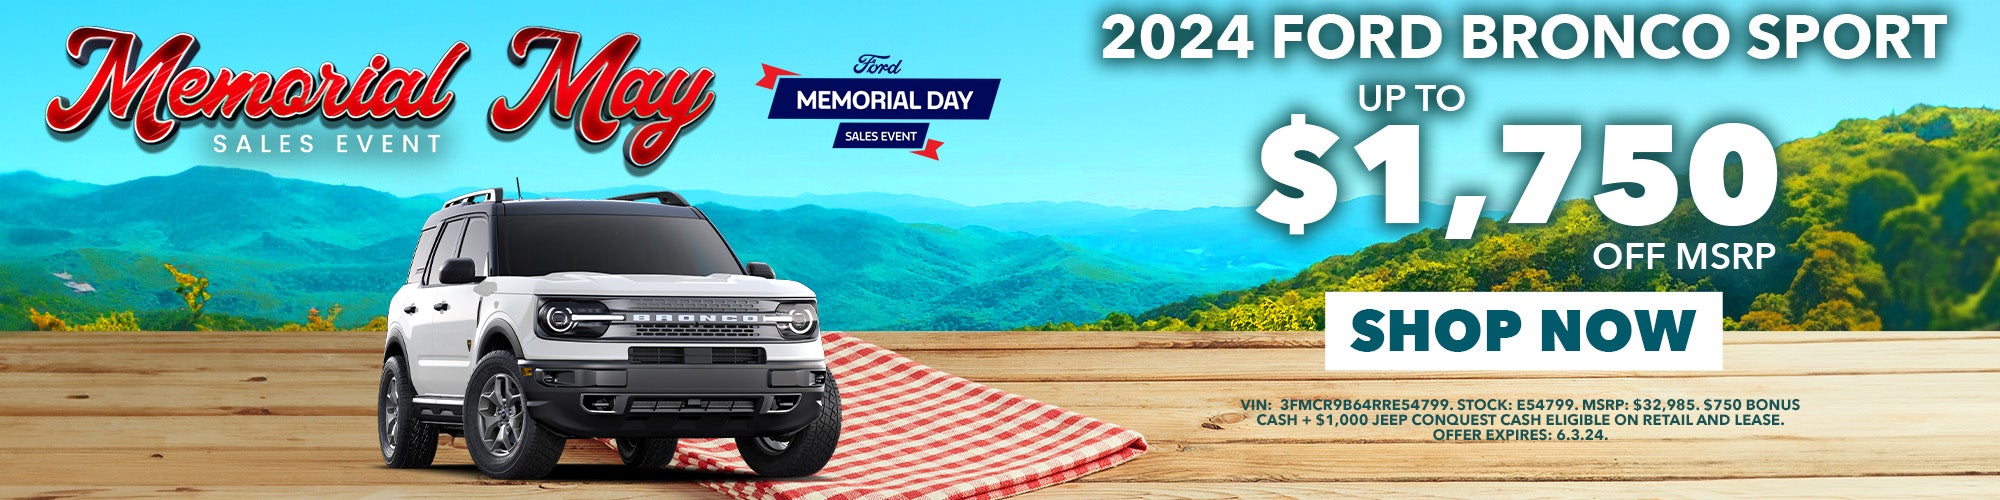 Up to $1,750 off 2024 Bronco Sport